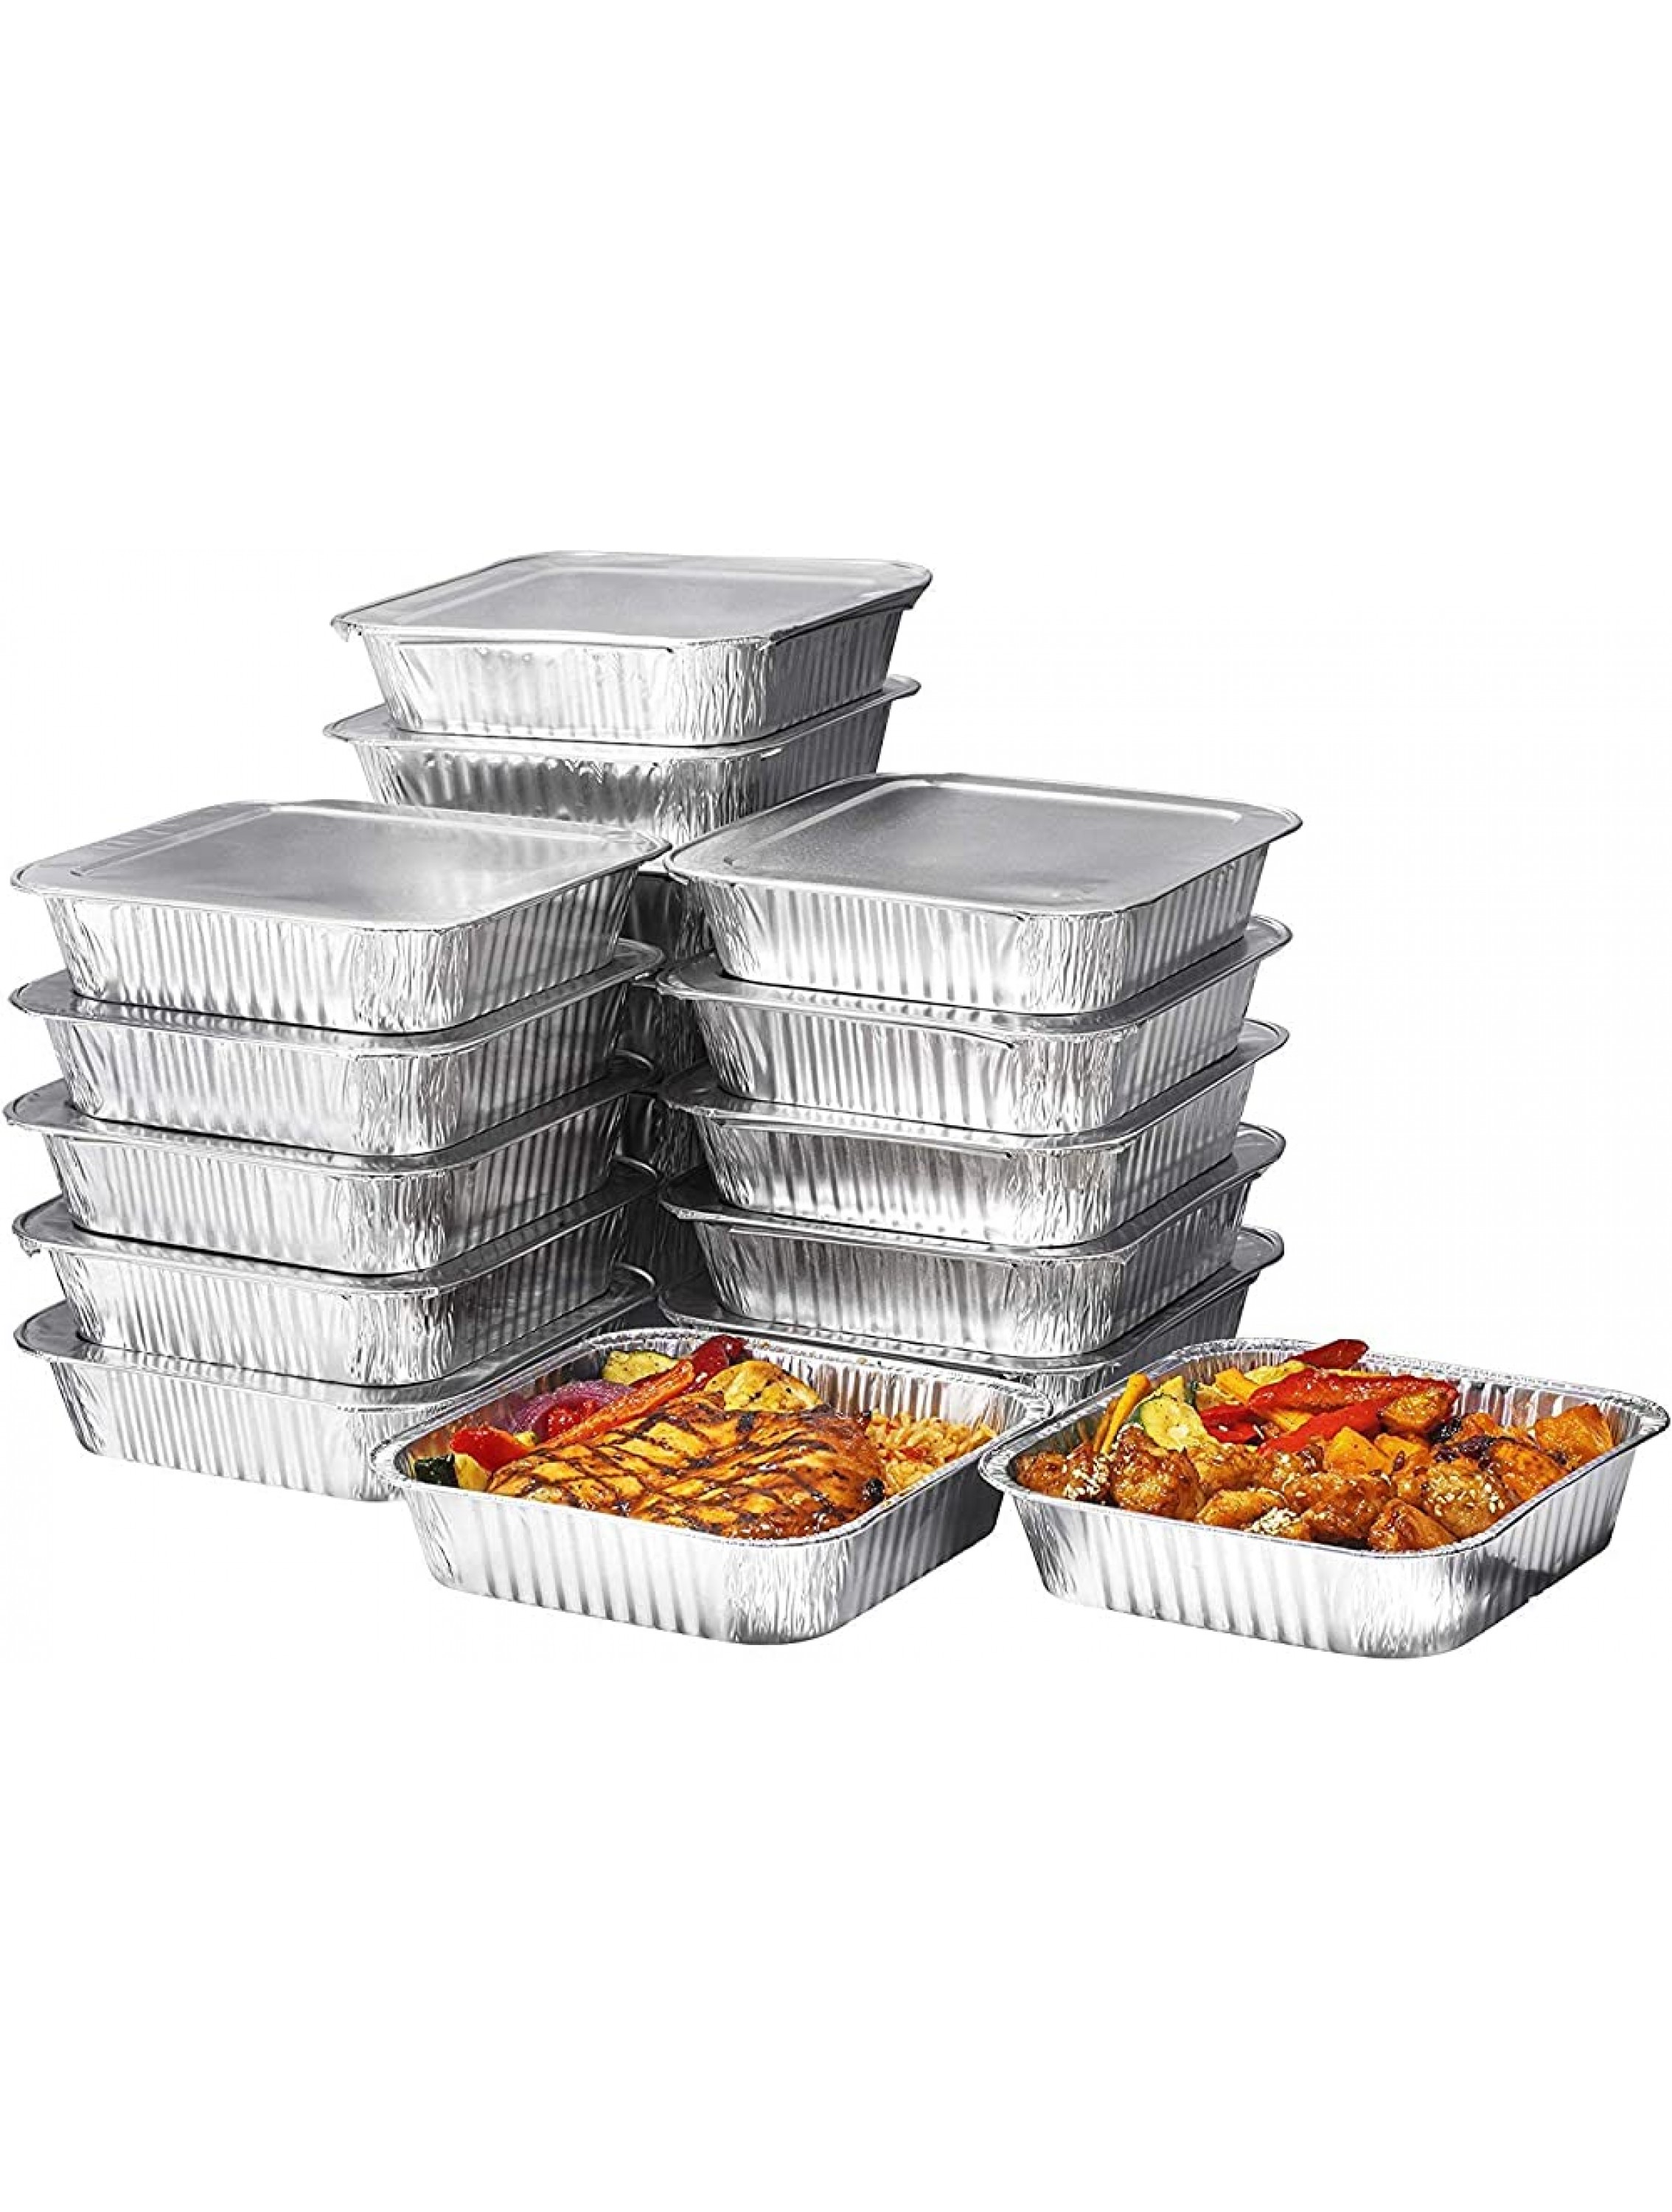 [25 Pack] 8 Square Disposable Aluminum Cake Pans with Foil Lids Foil Pans Food Containers Perfect for Baking Cakes Cooking Roasting Homemade breads - B034NFQLR